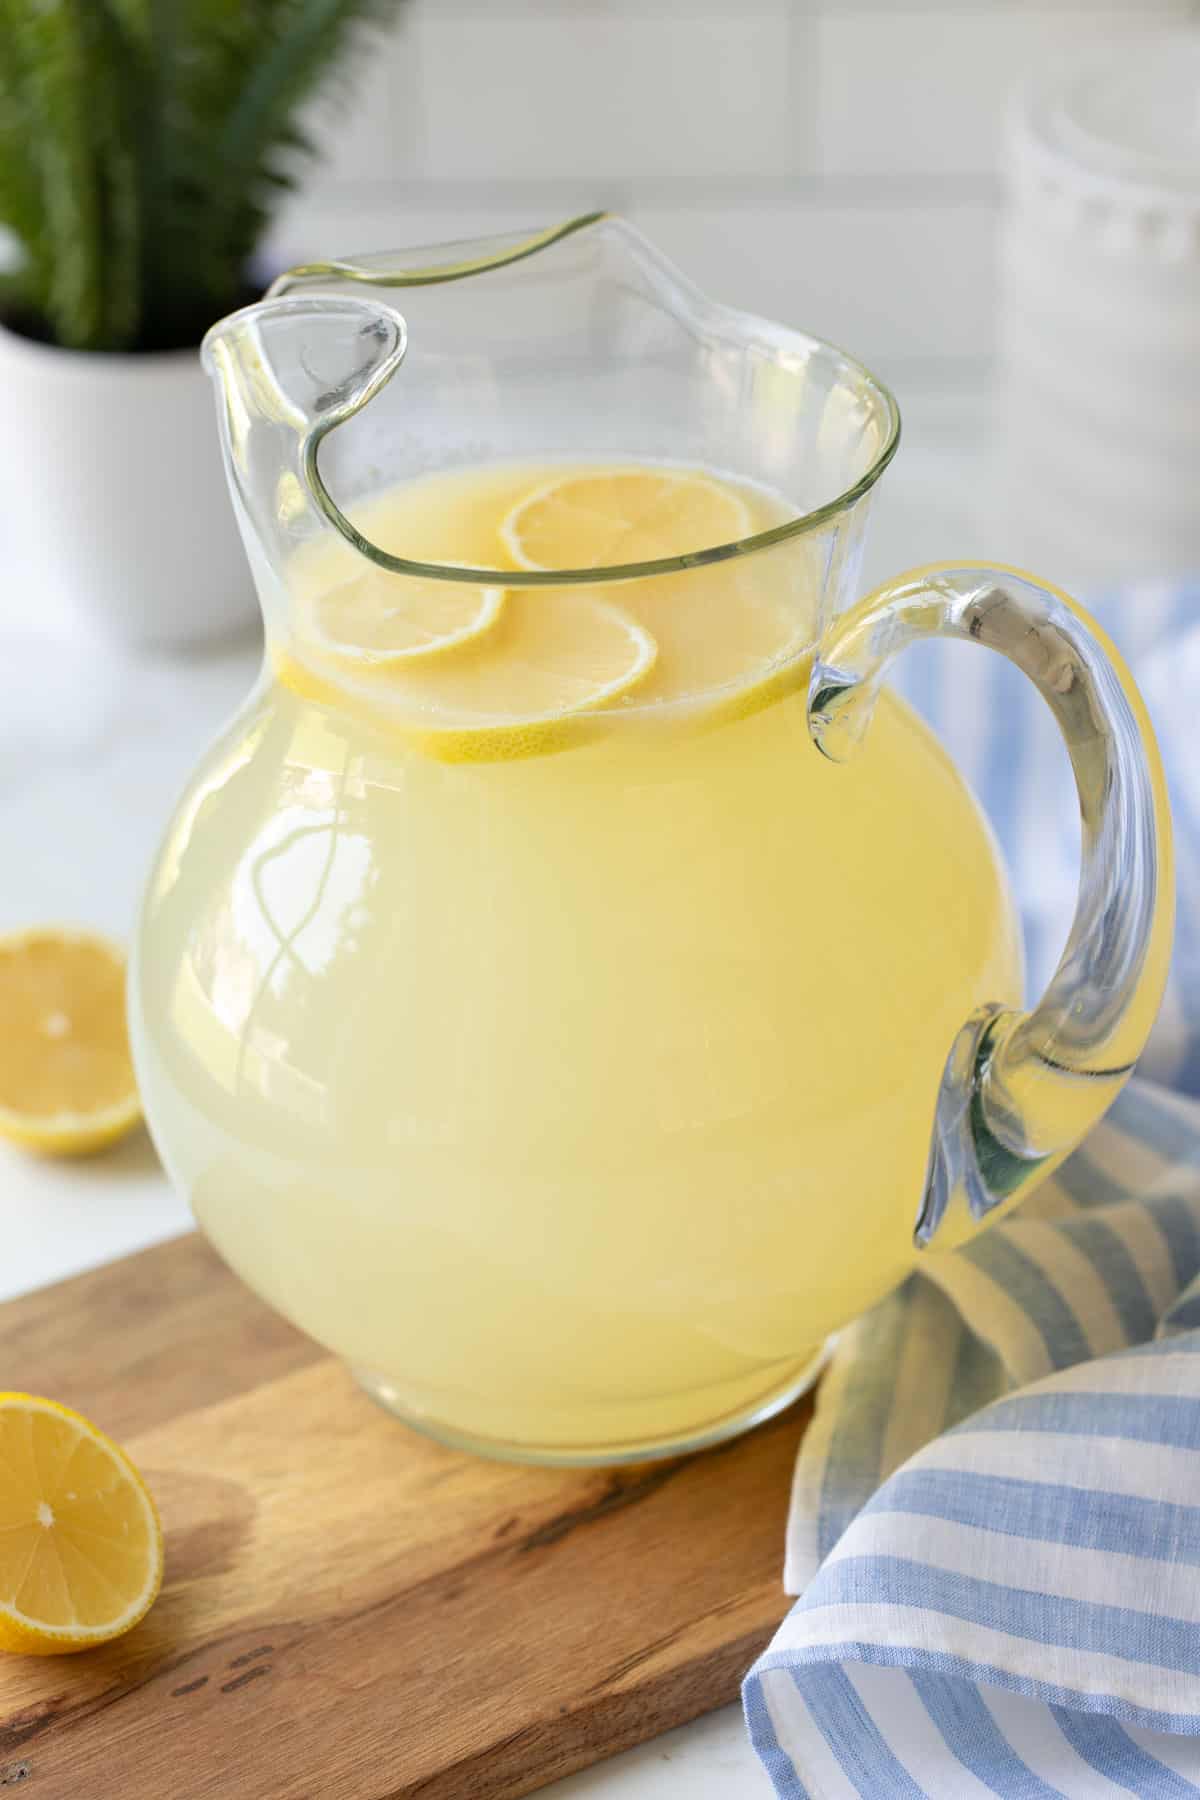 Angled view of a glass pitcher of homemade lemonade.